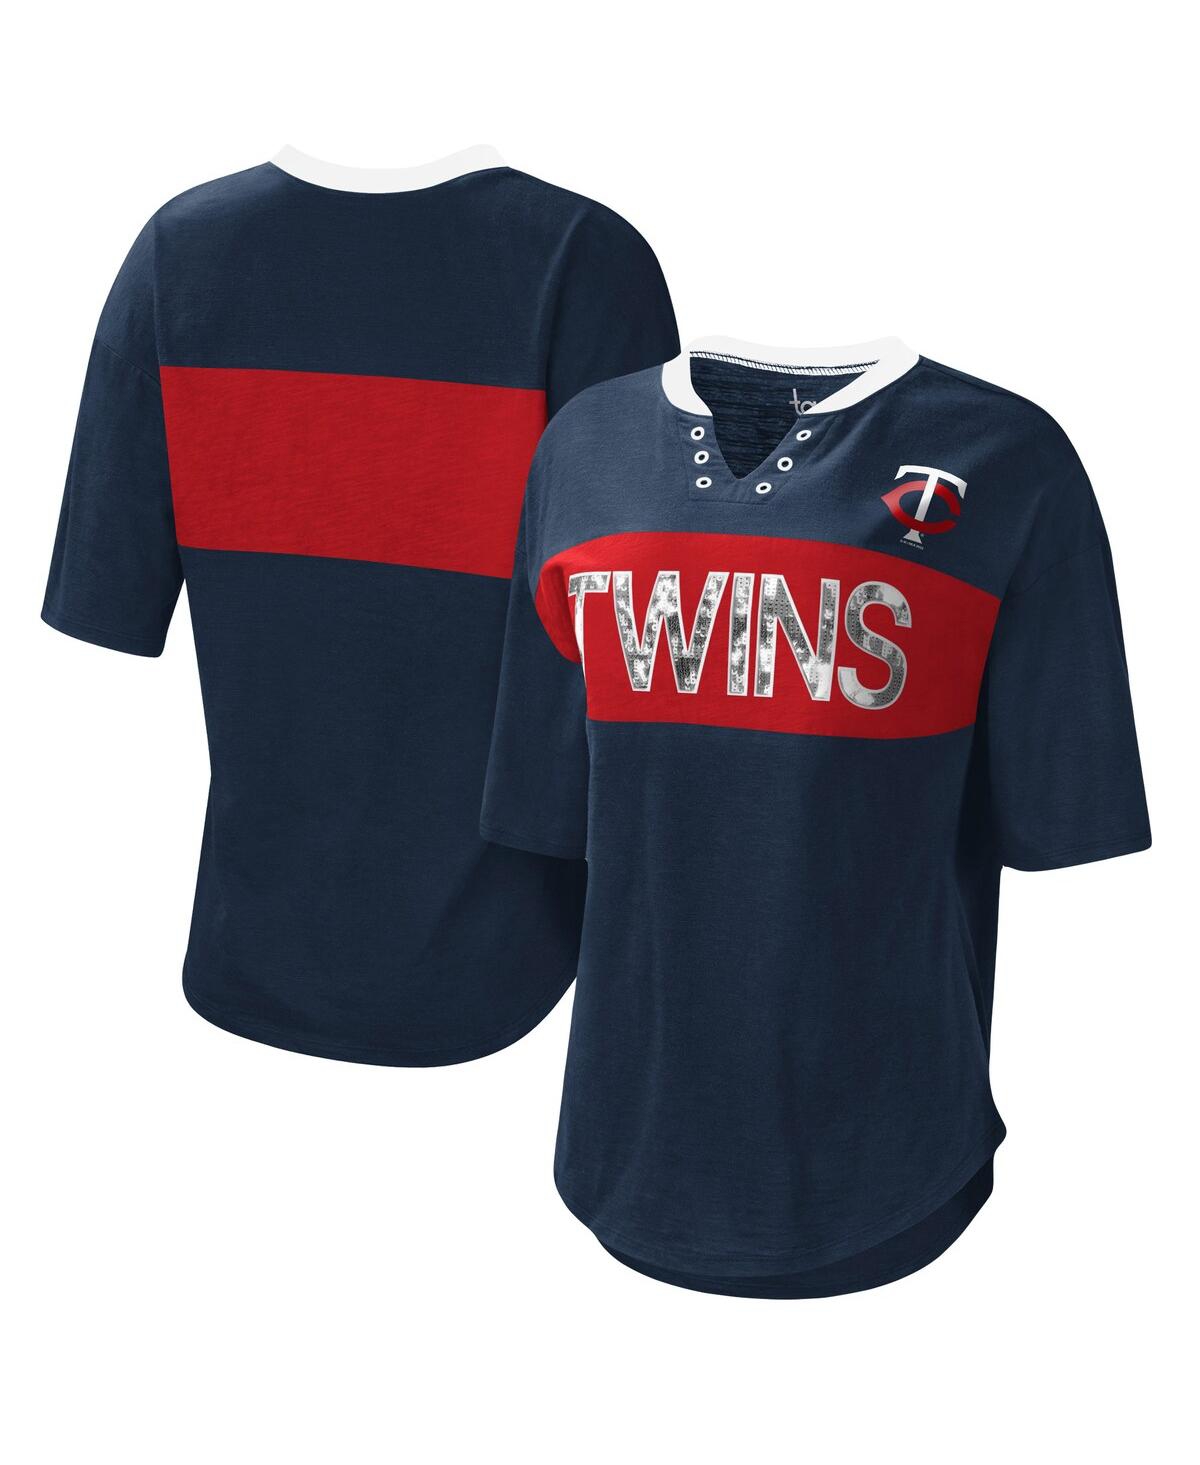 Women's Touch Navy and Red Minnesota Twins Lead Off Notch Neck T-shirt - Navy, Red